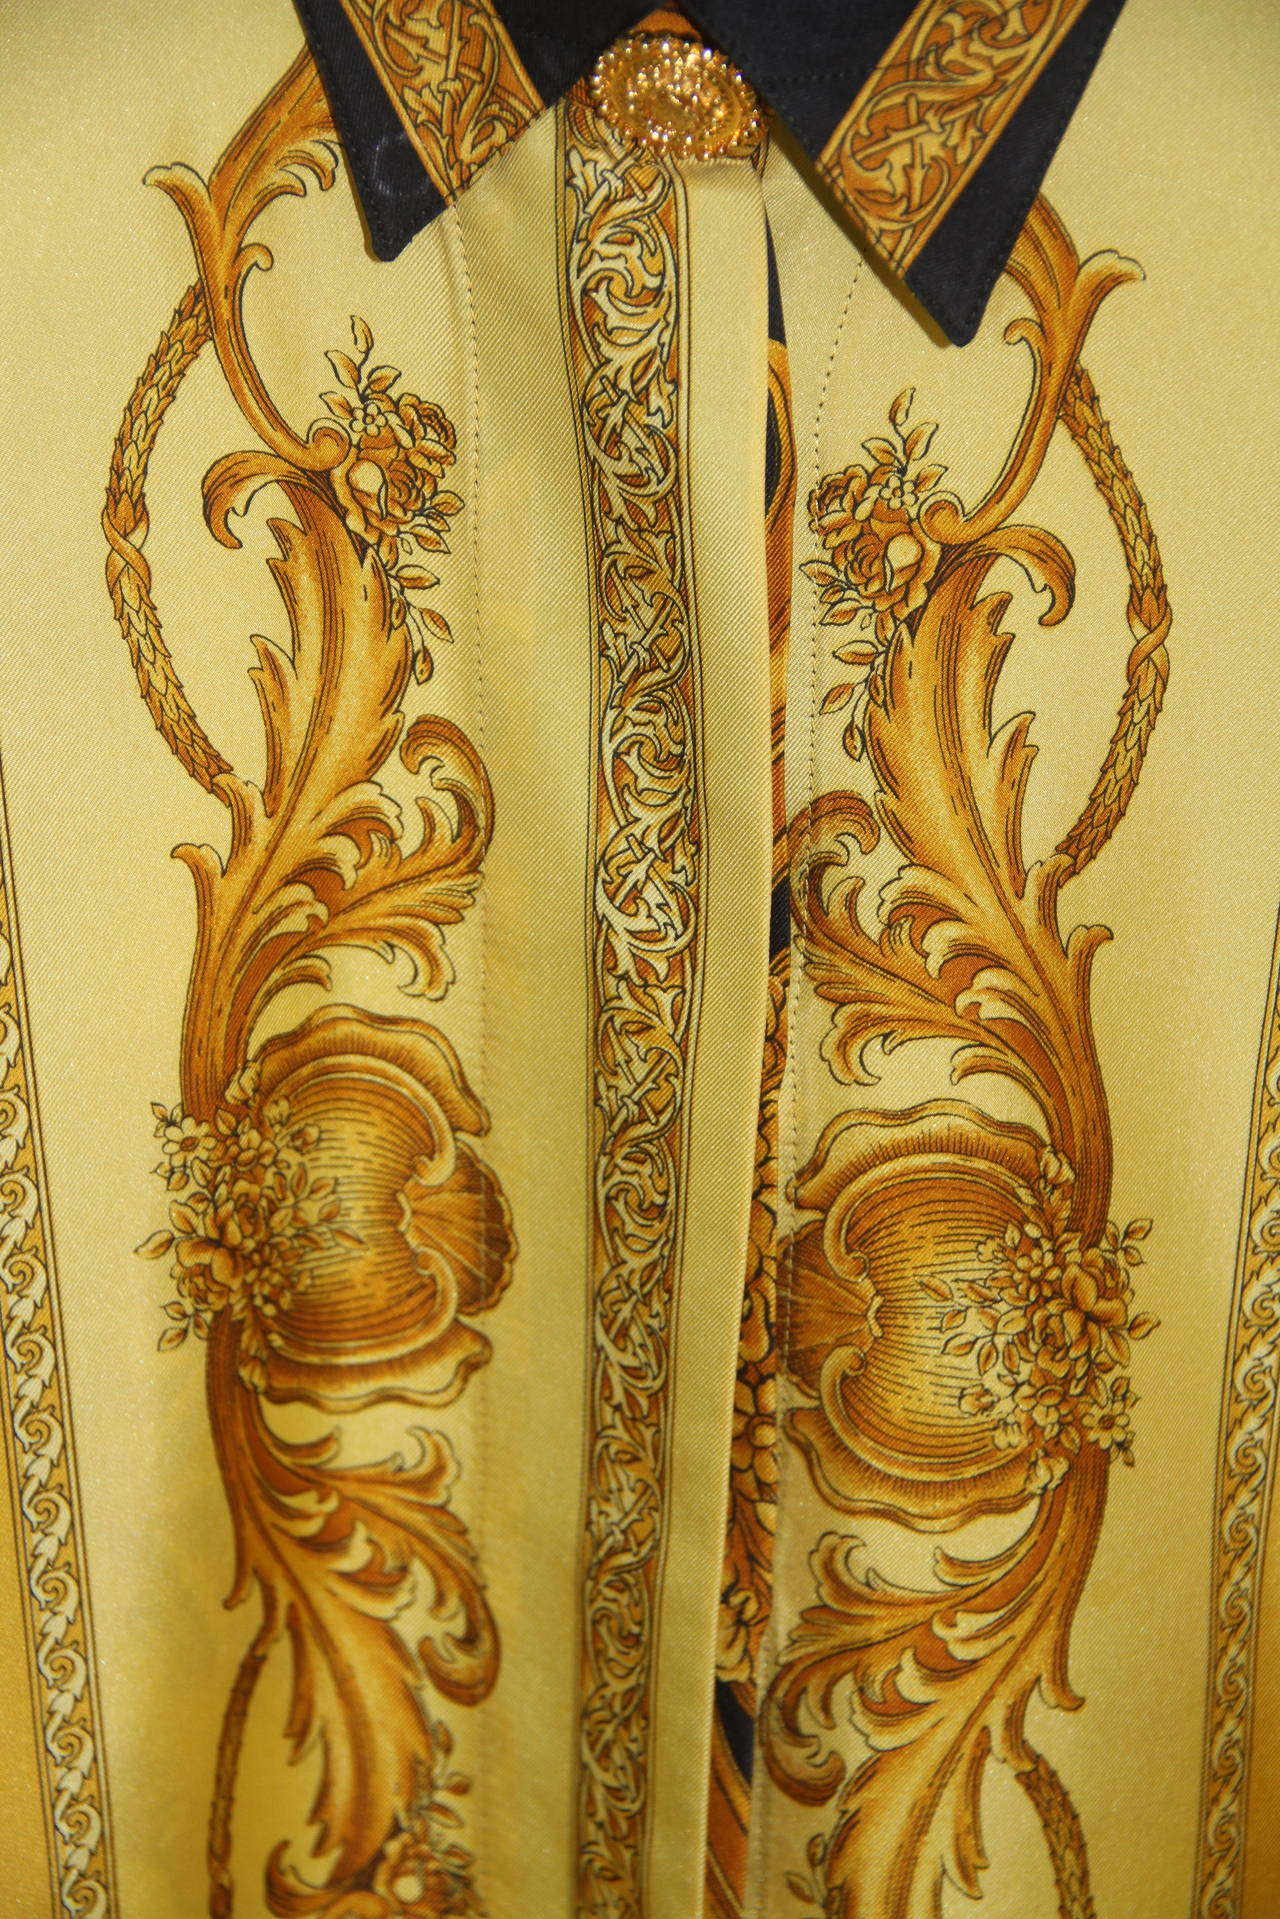 Gianni Versace Bondage Collection Baroque Printed Blouse Fall 1992 In Excellent Condition For Sale In W1, GB